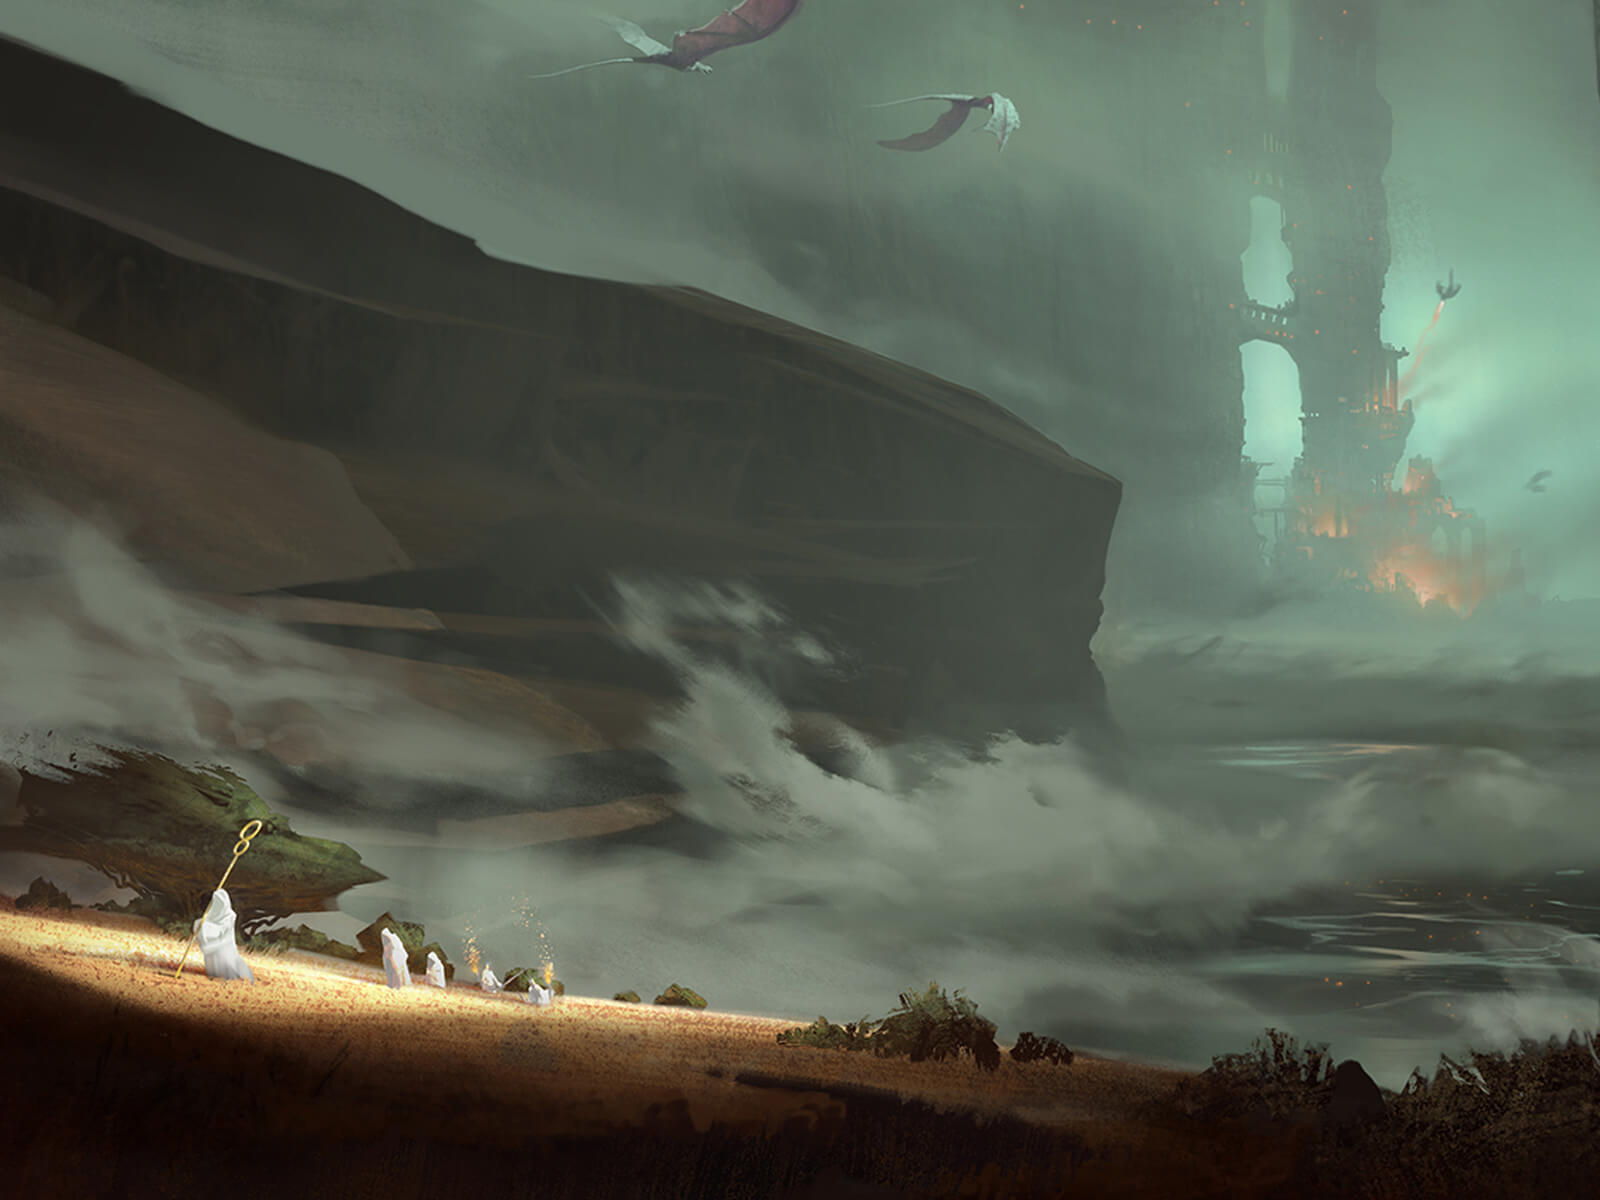 digital painting of pterodactyls flying over white-clad shepard-like characters toward a distant fiery structure